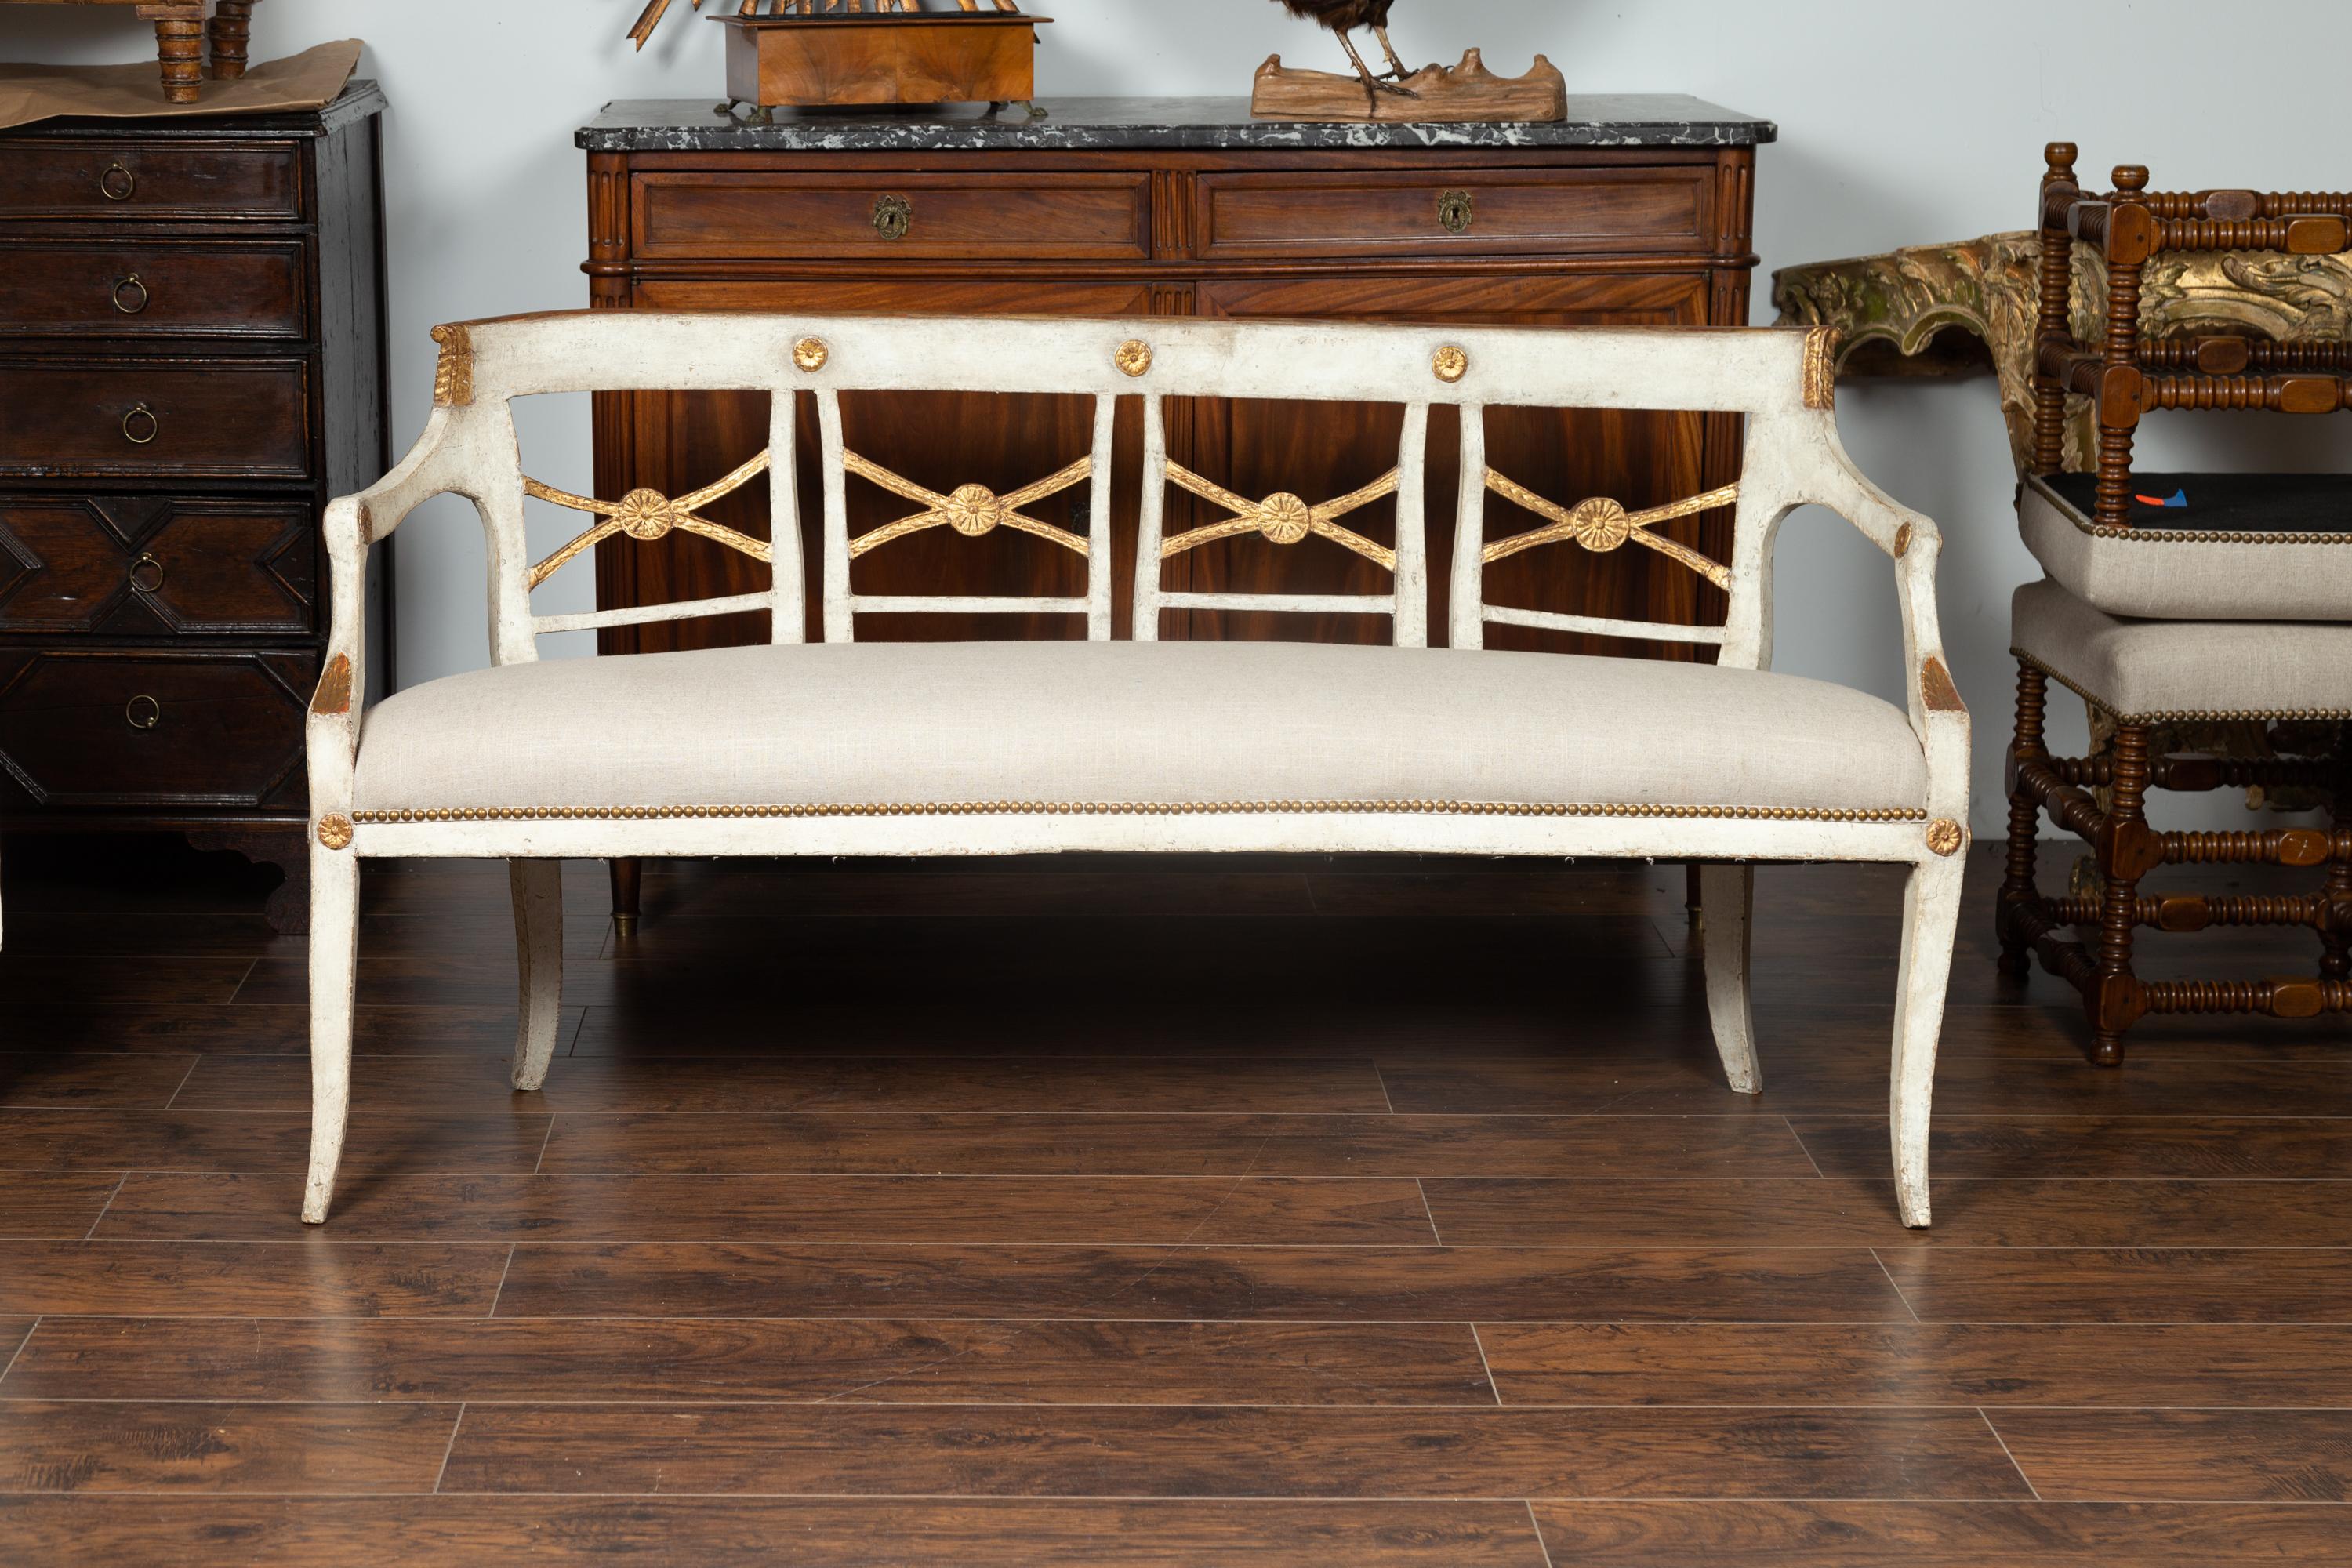 Italian 1860s Painted Wood Bench with Gilded Accents and New Upholstery In Good Condition For Sale In Atlanta, GA